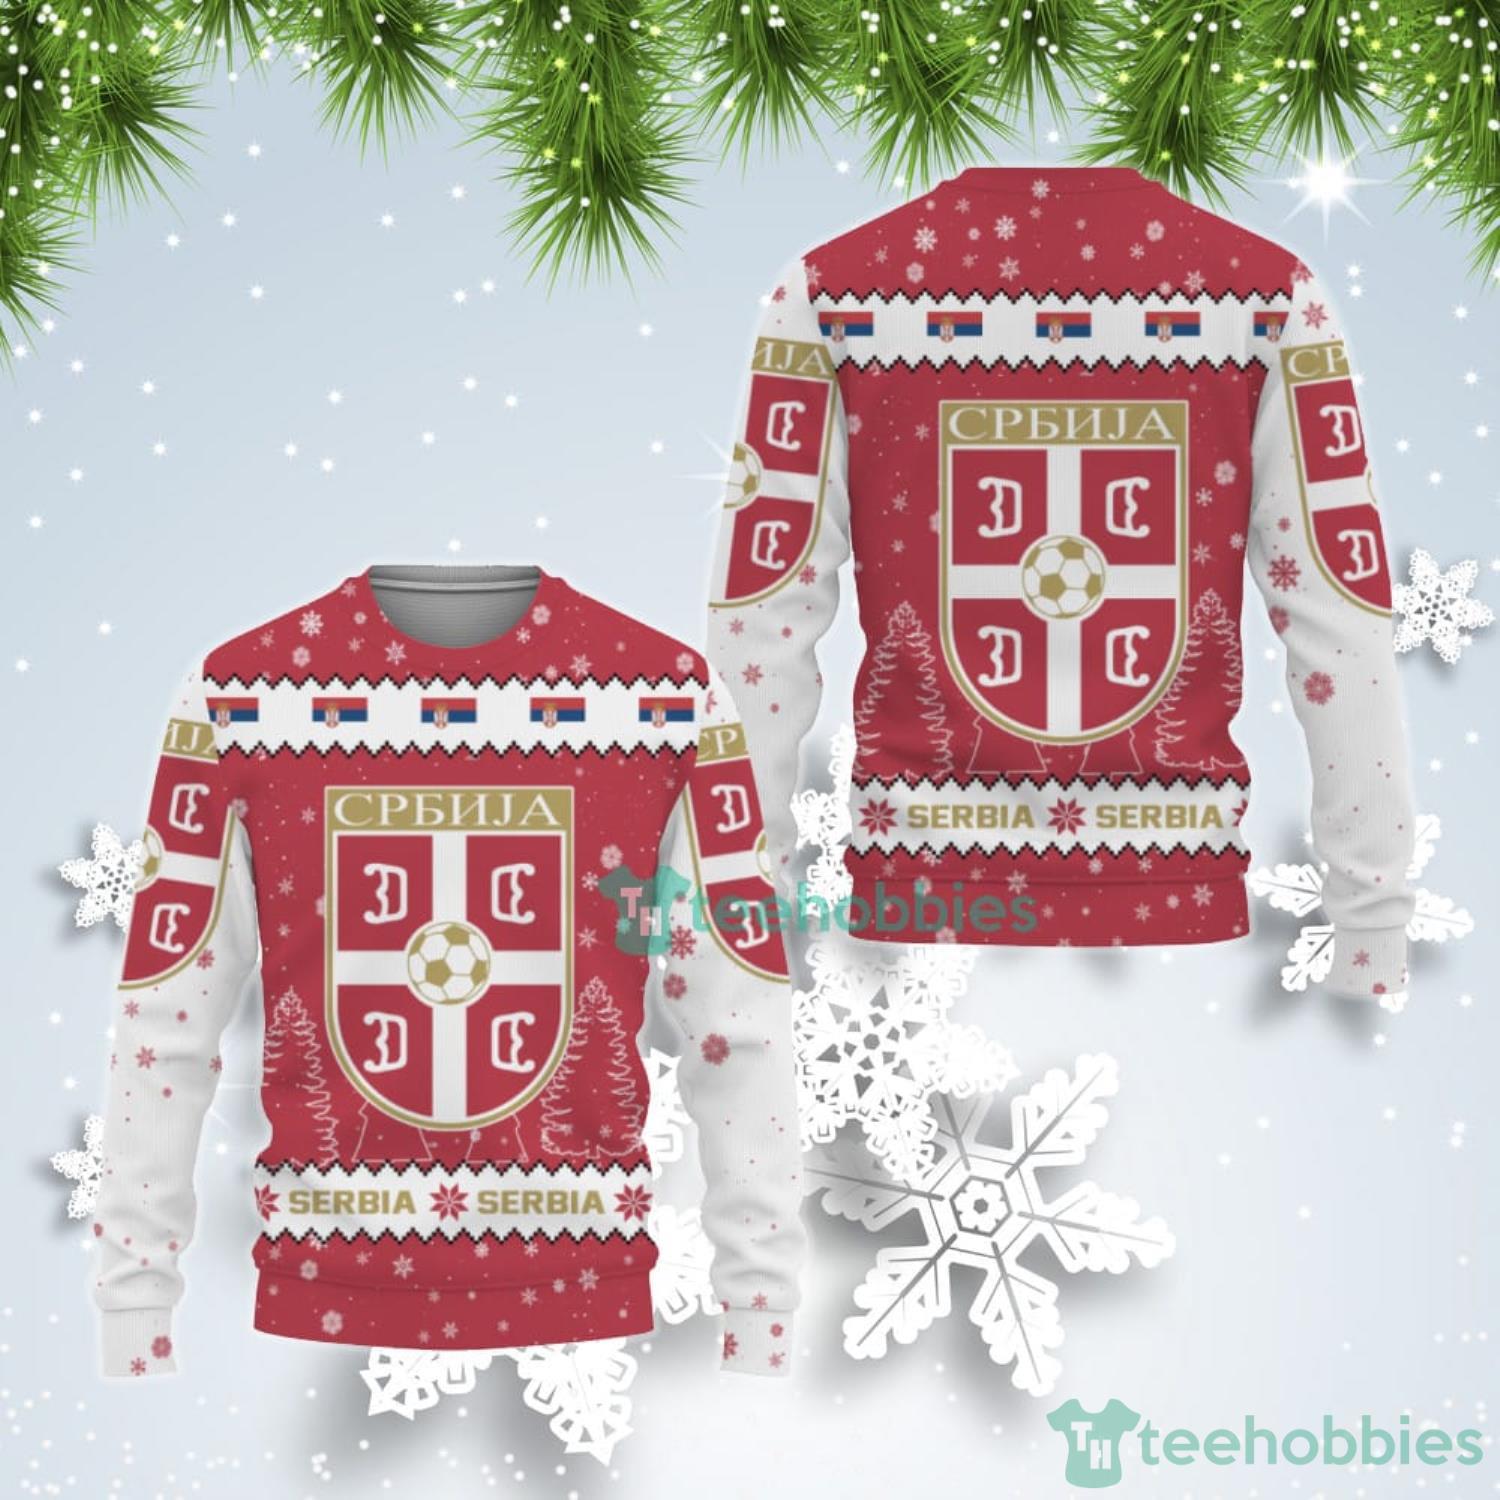 Serbia National Soccer Team Qatar World Cup 2022 Winter Season Ugly Christmas Sweater Product Photo 1